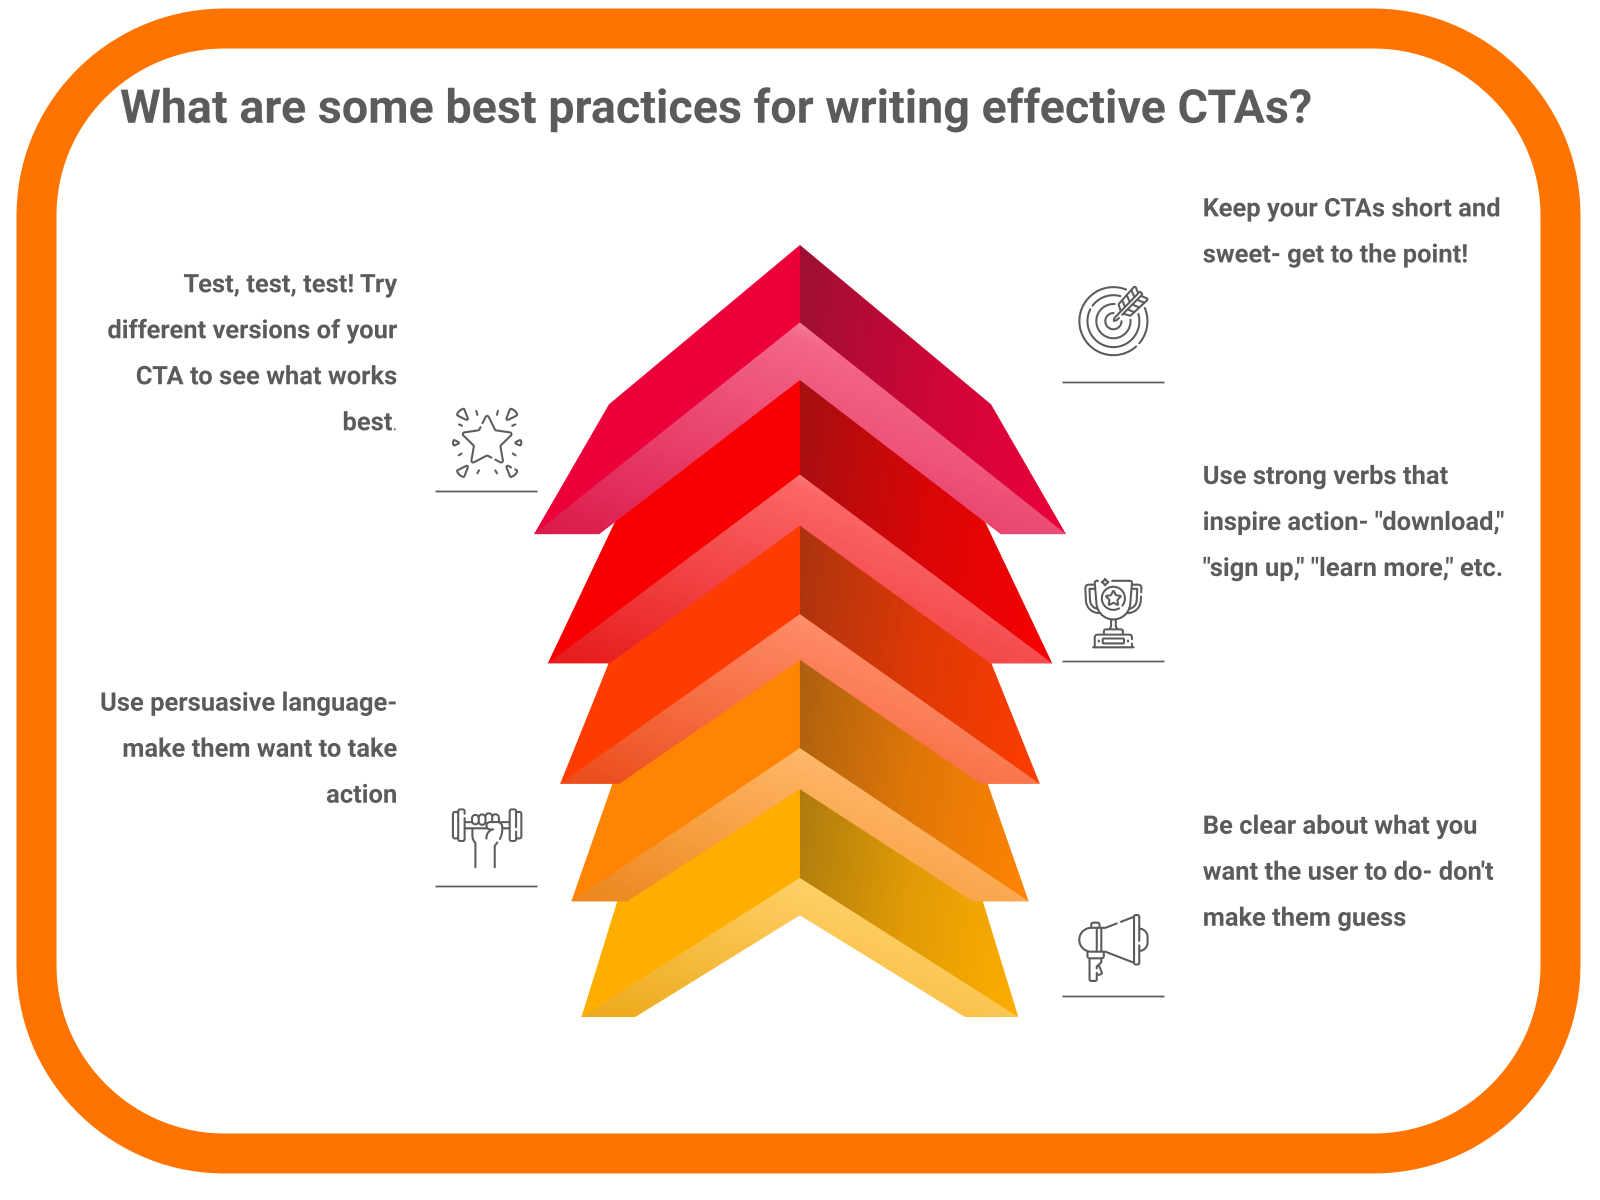 What are some best practices for writing effective and optimized CTA phrases?